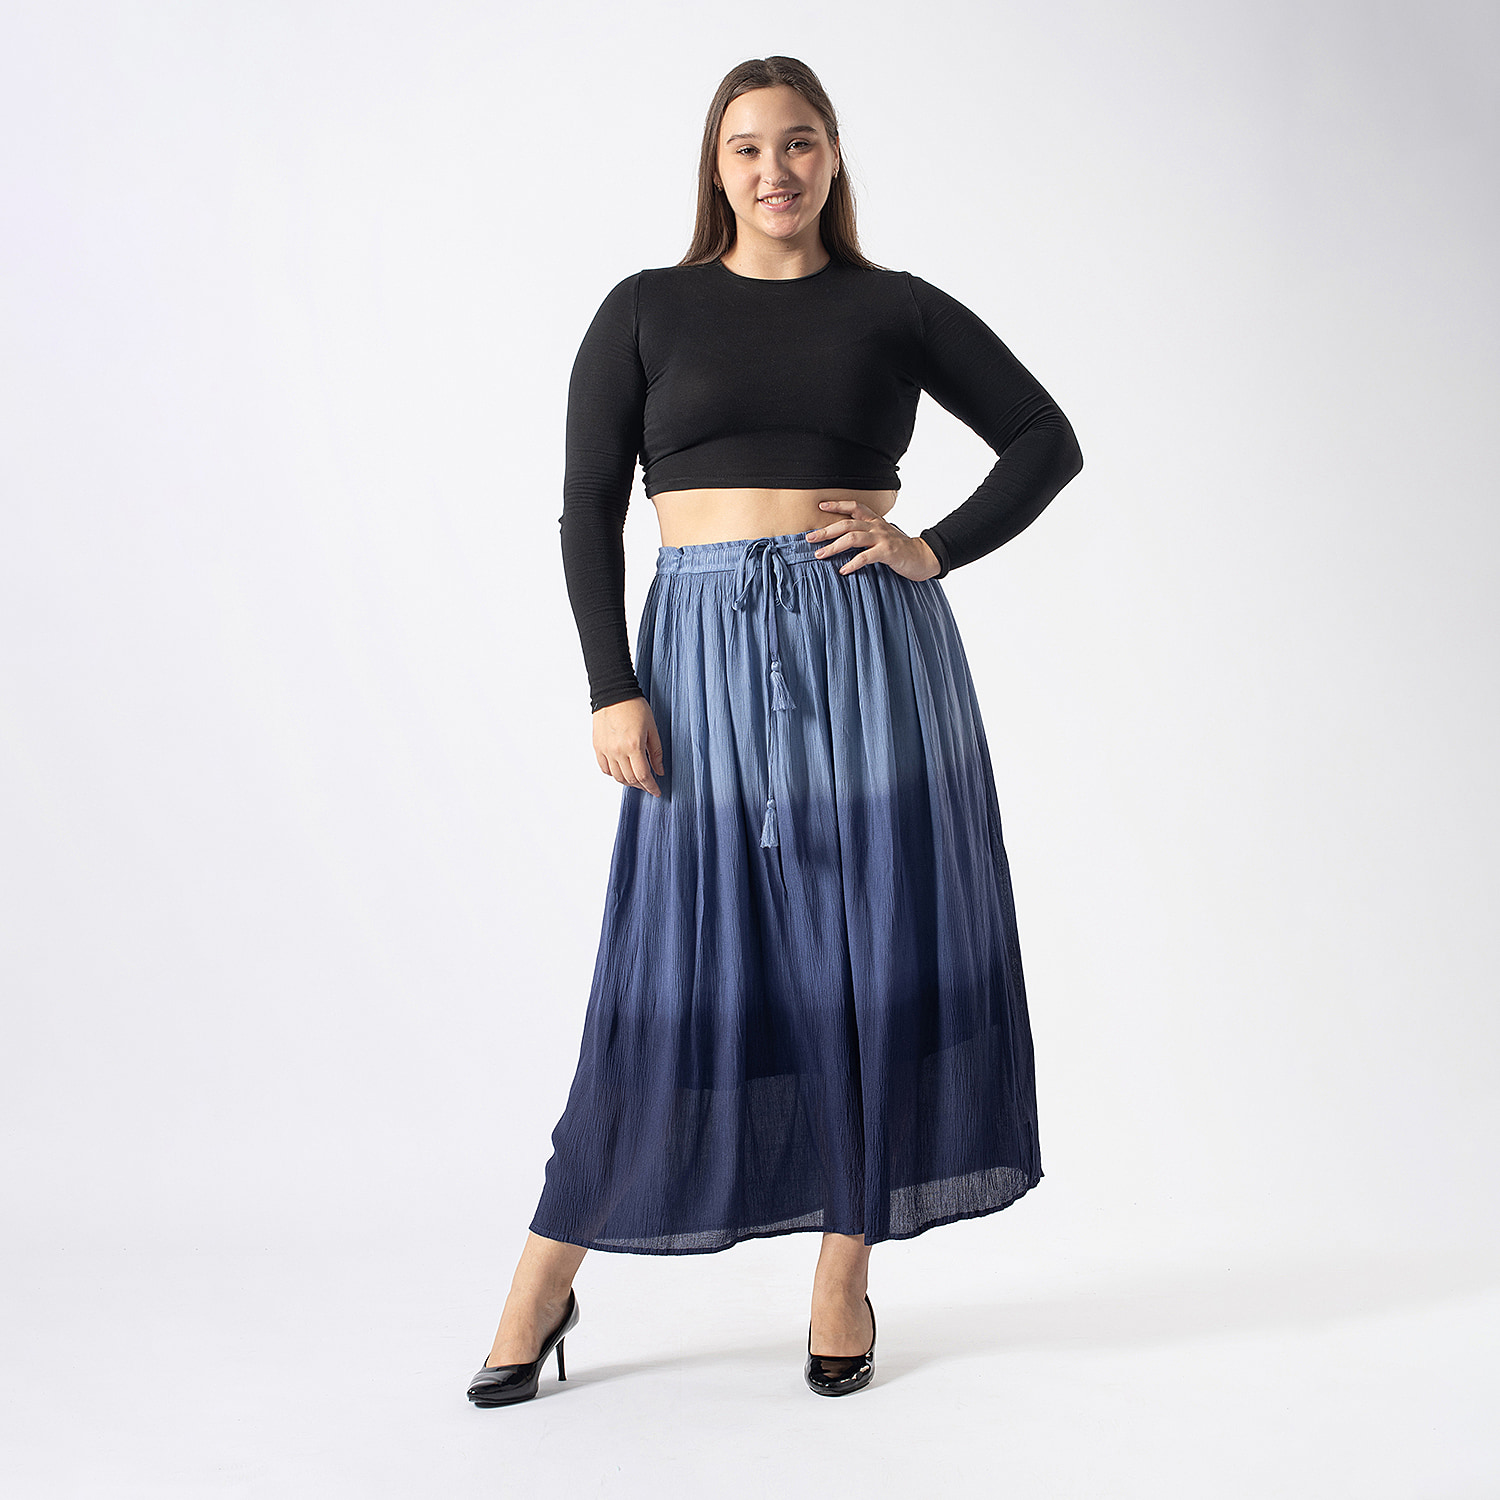 Tamsy-Viscose-Lined-Skirt-Size-85x1-cm-Navy-Turquoise